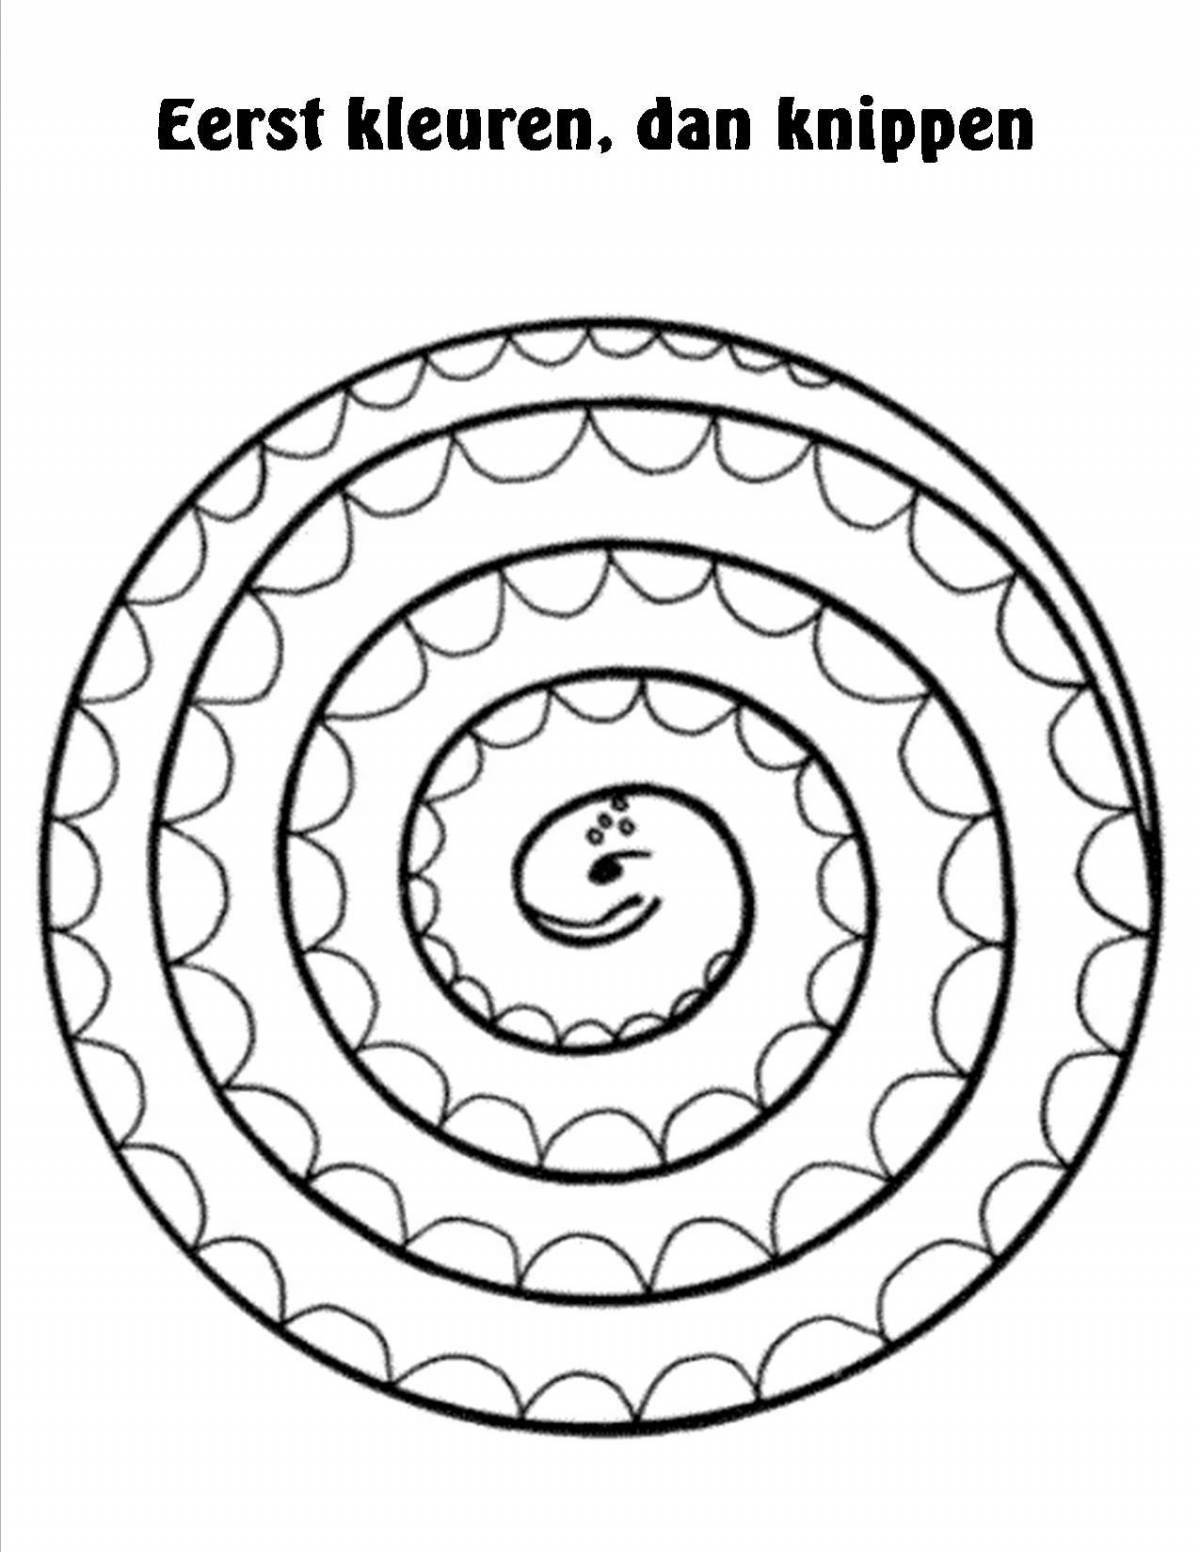 Coloured spiral coloring book for children